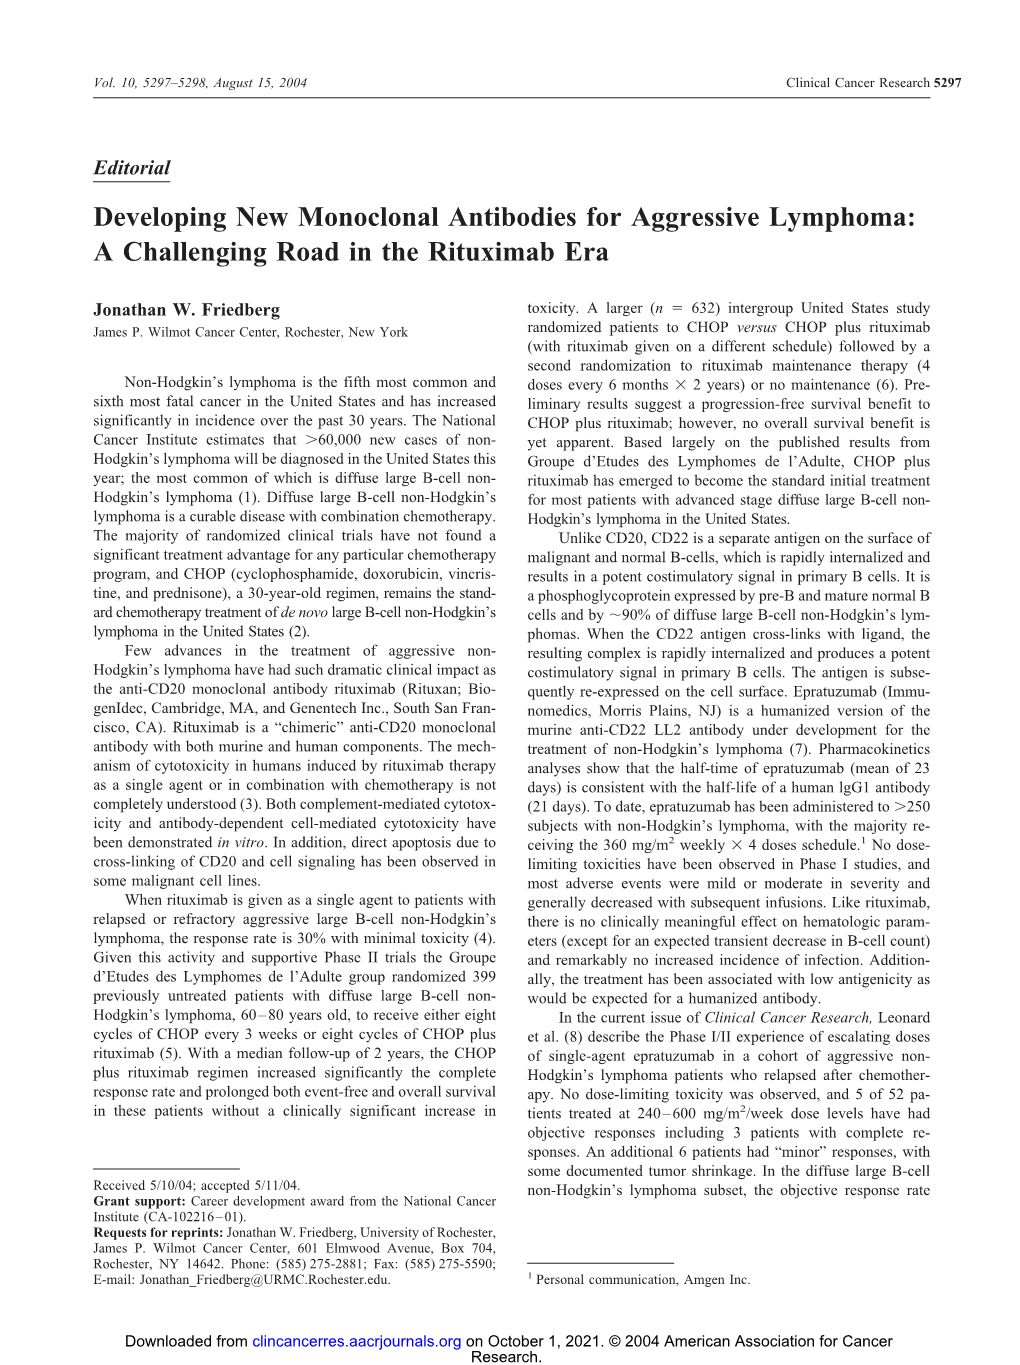 Developing New Monoclonal Antibodies for Aggressive Lymphoma: a Challenging Road in the Rituximab Era